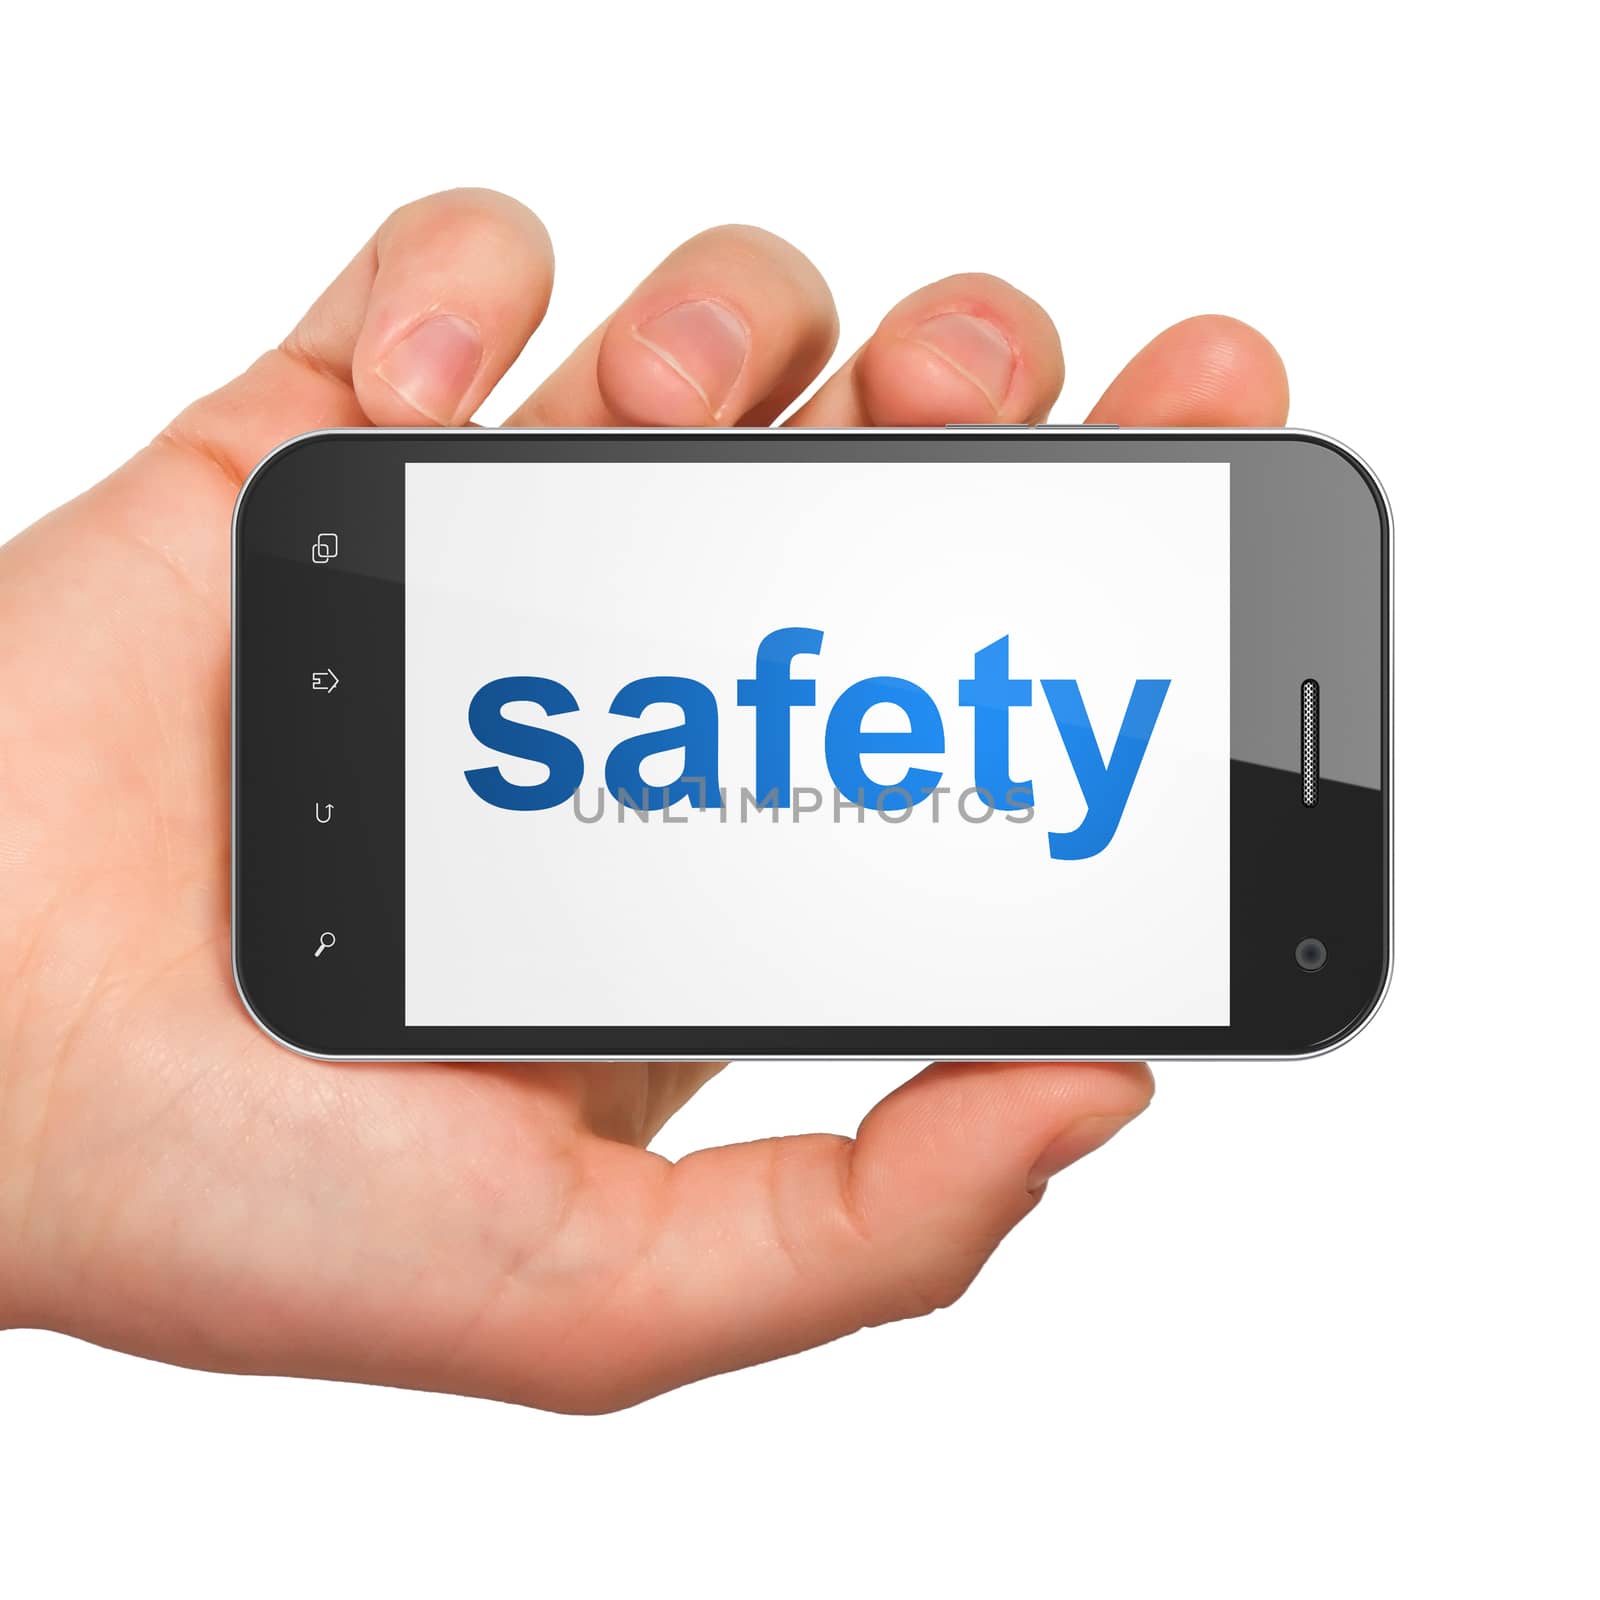 Safety concept: hand holding smartphone with word Safety on display. Mobile smart phone on White background, 3d render